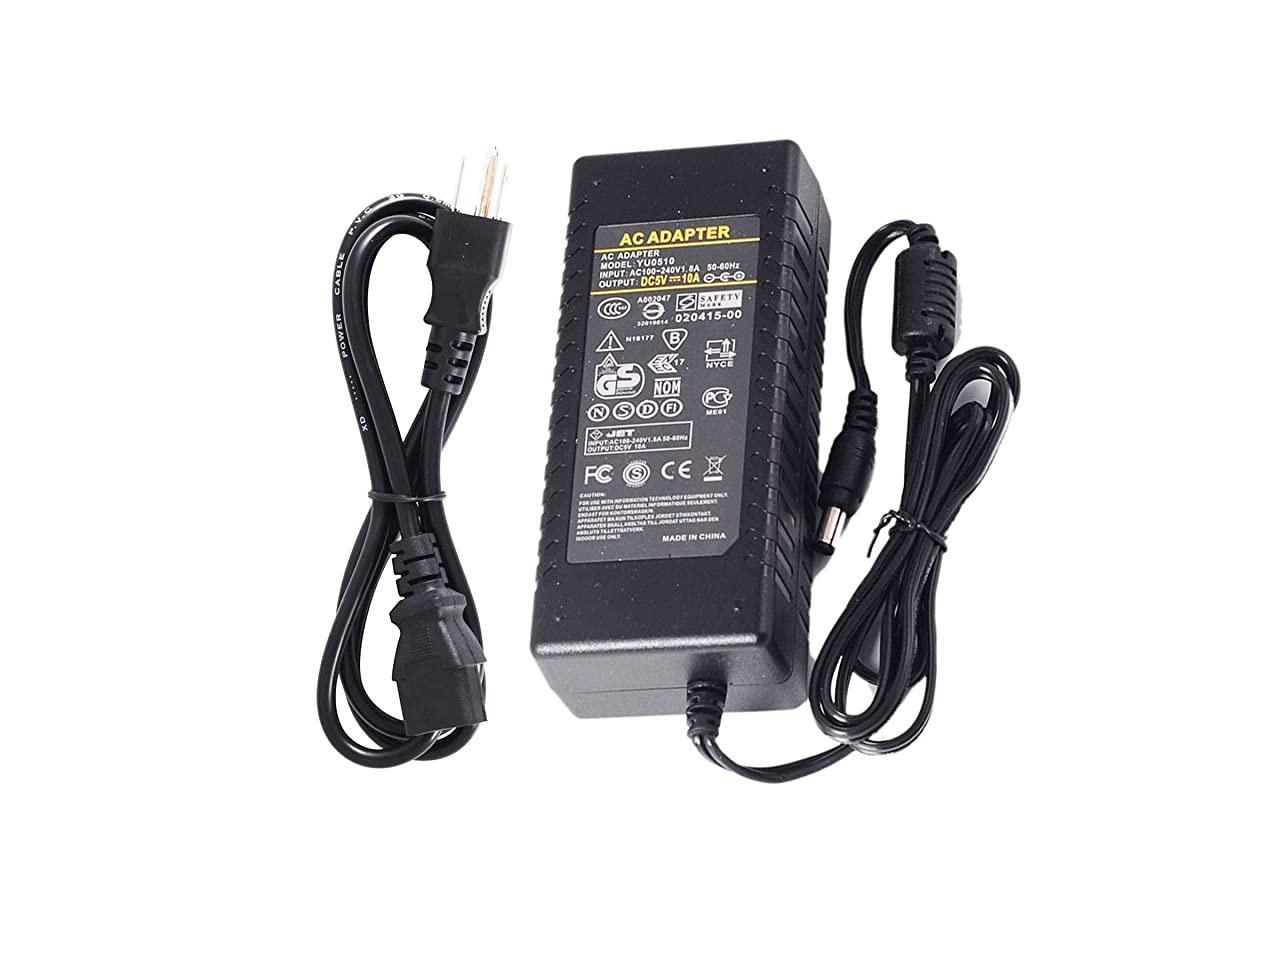 show original title Details about   LED Power Supply Transformer DC 5V 12V 24V Switching Power Supply Adapter Power Supply LED Strip